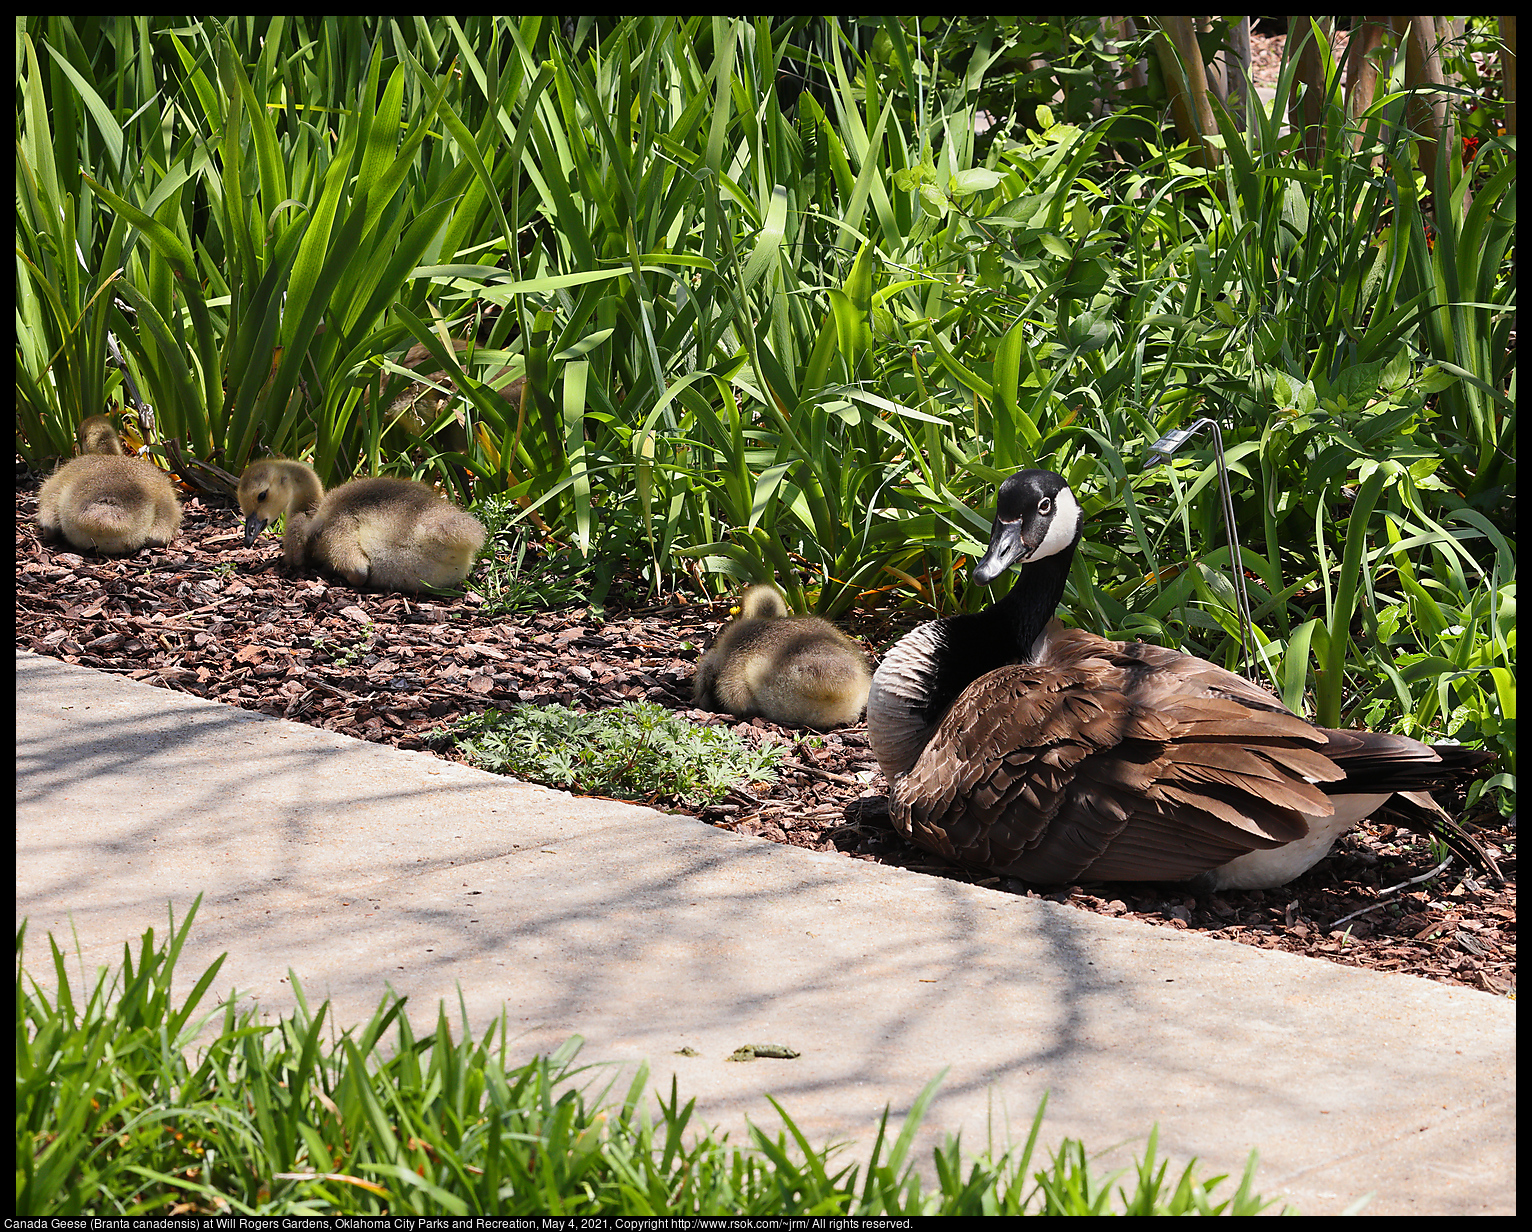 Canada Geese (Branta canadensis) at Will Rogers Gardens, Oklahoma City Parks and Recreation, May 4, 2021